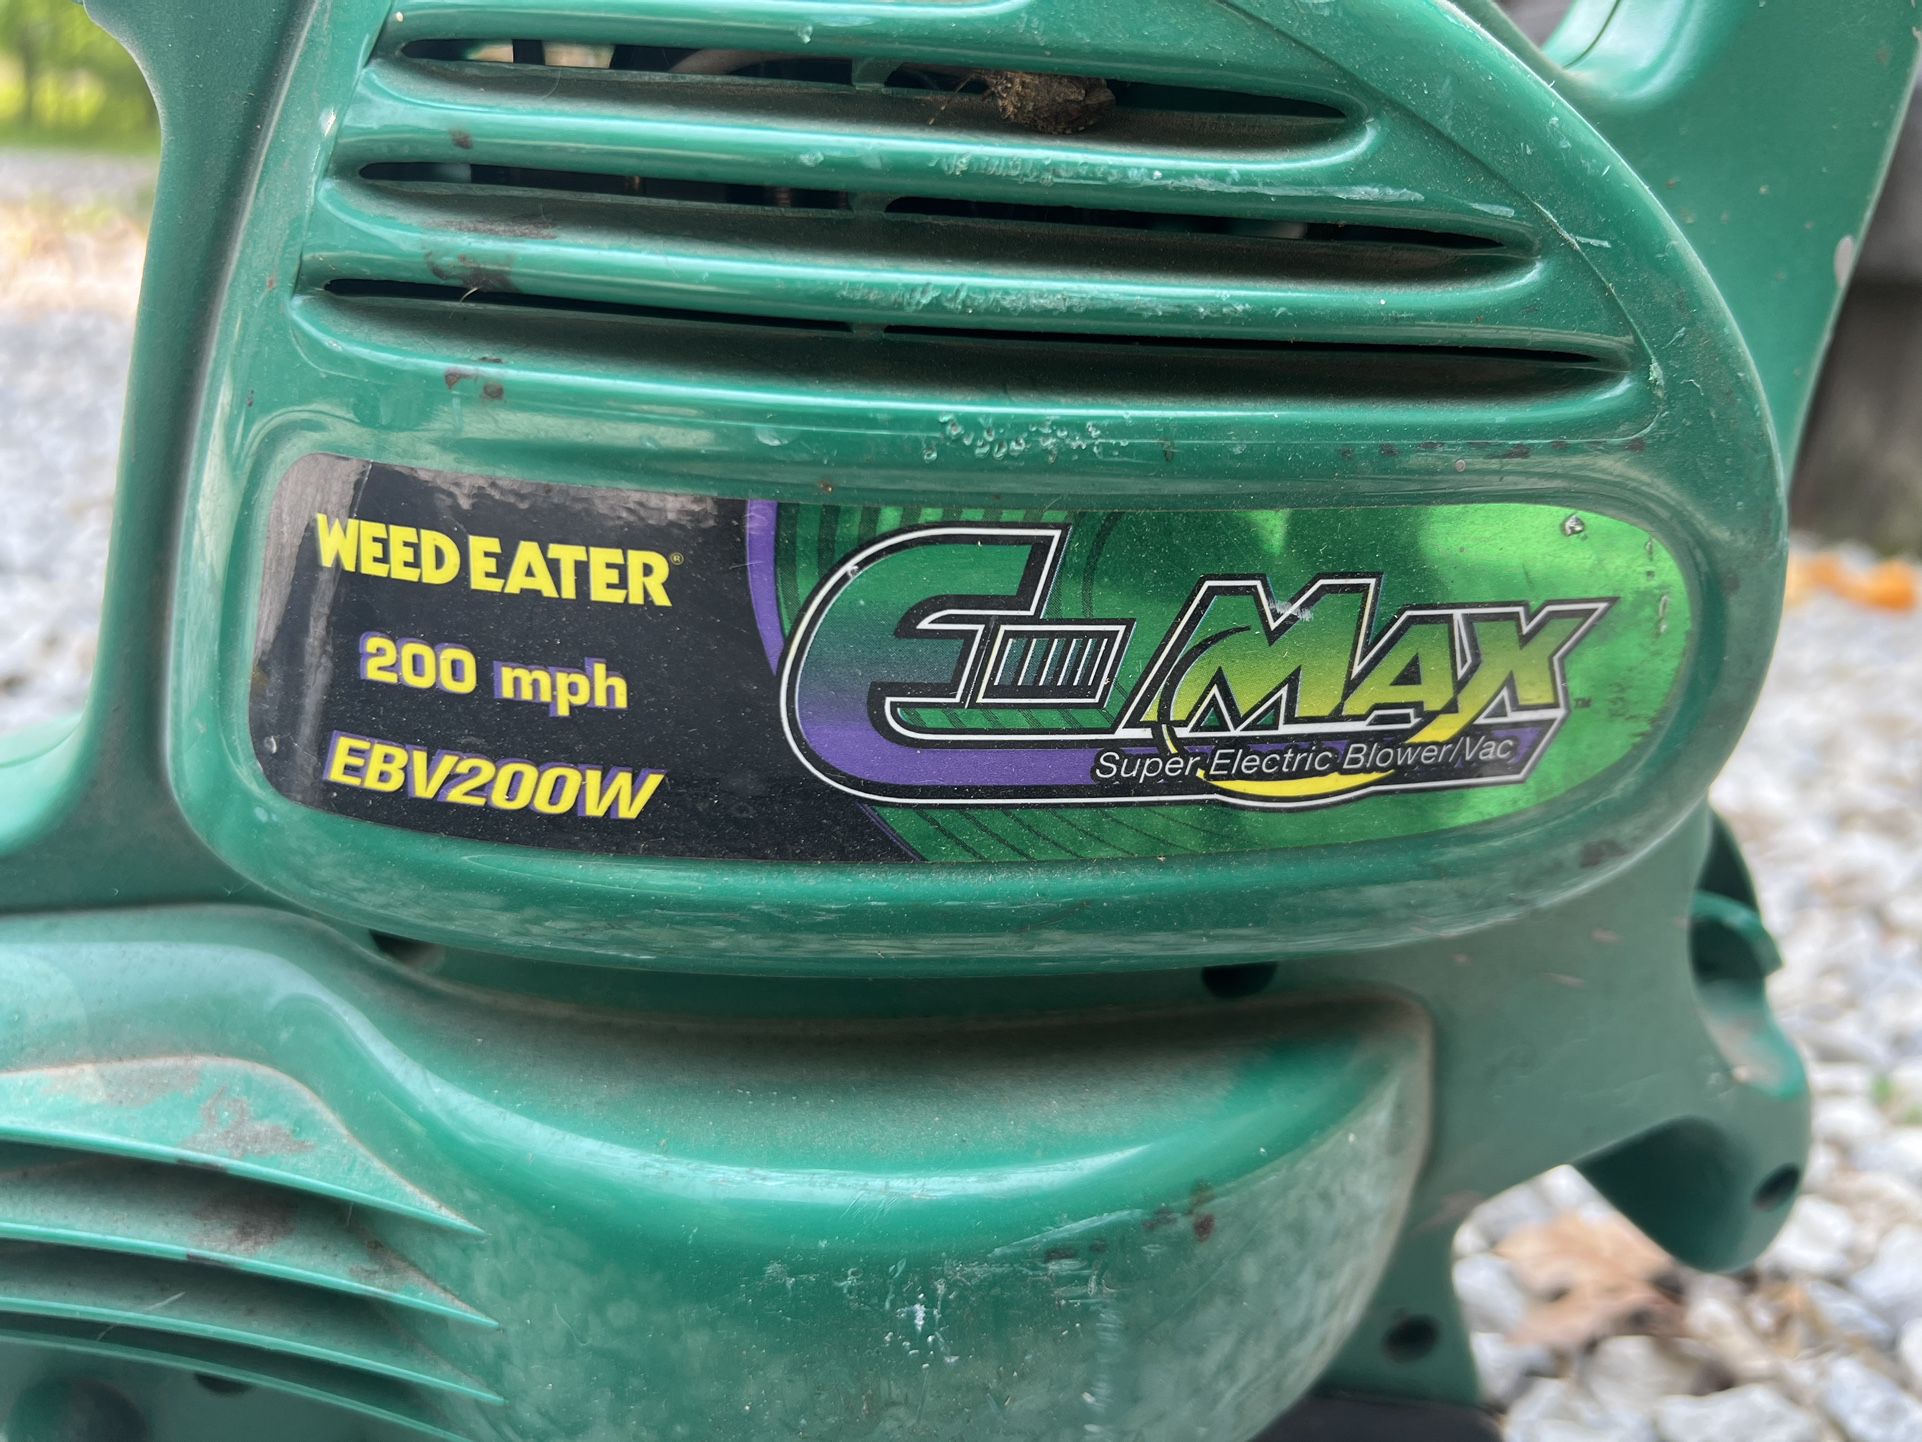 Weed Eater 200mph EBV200W 